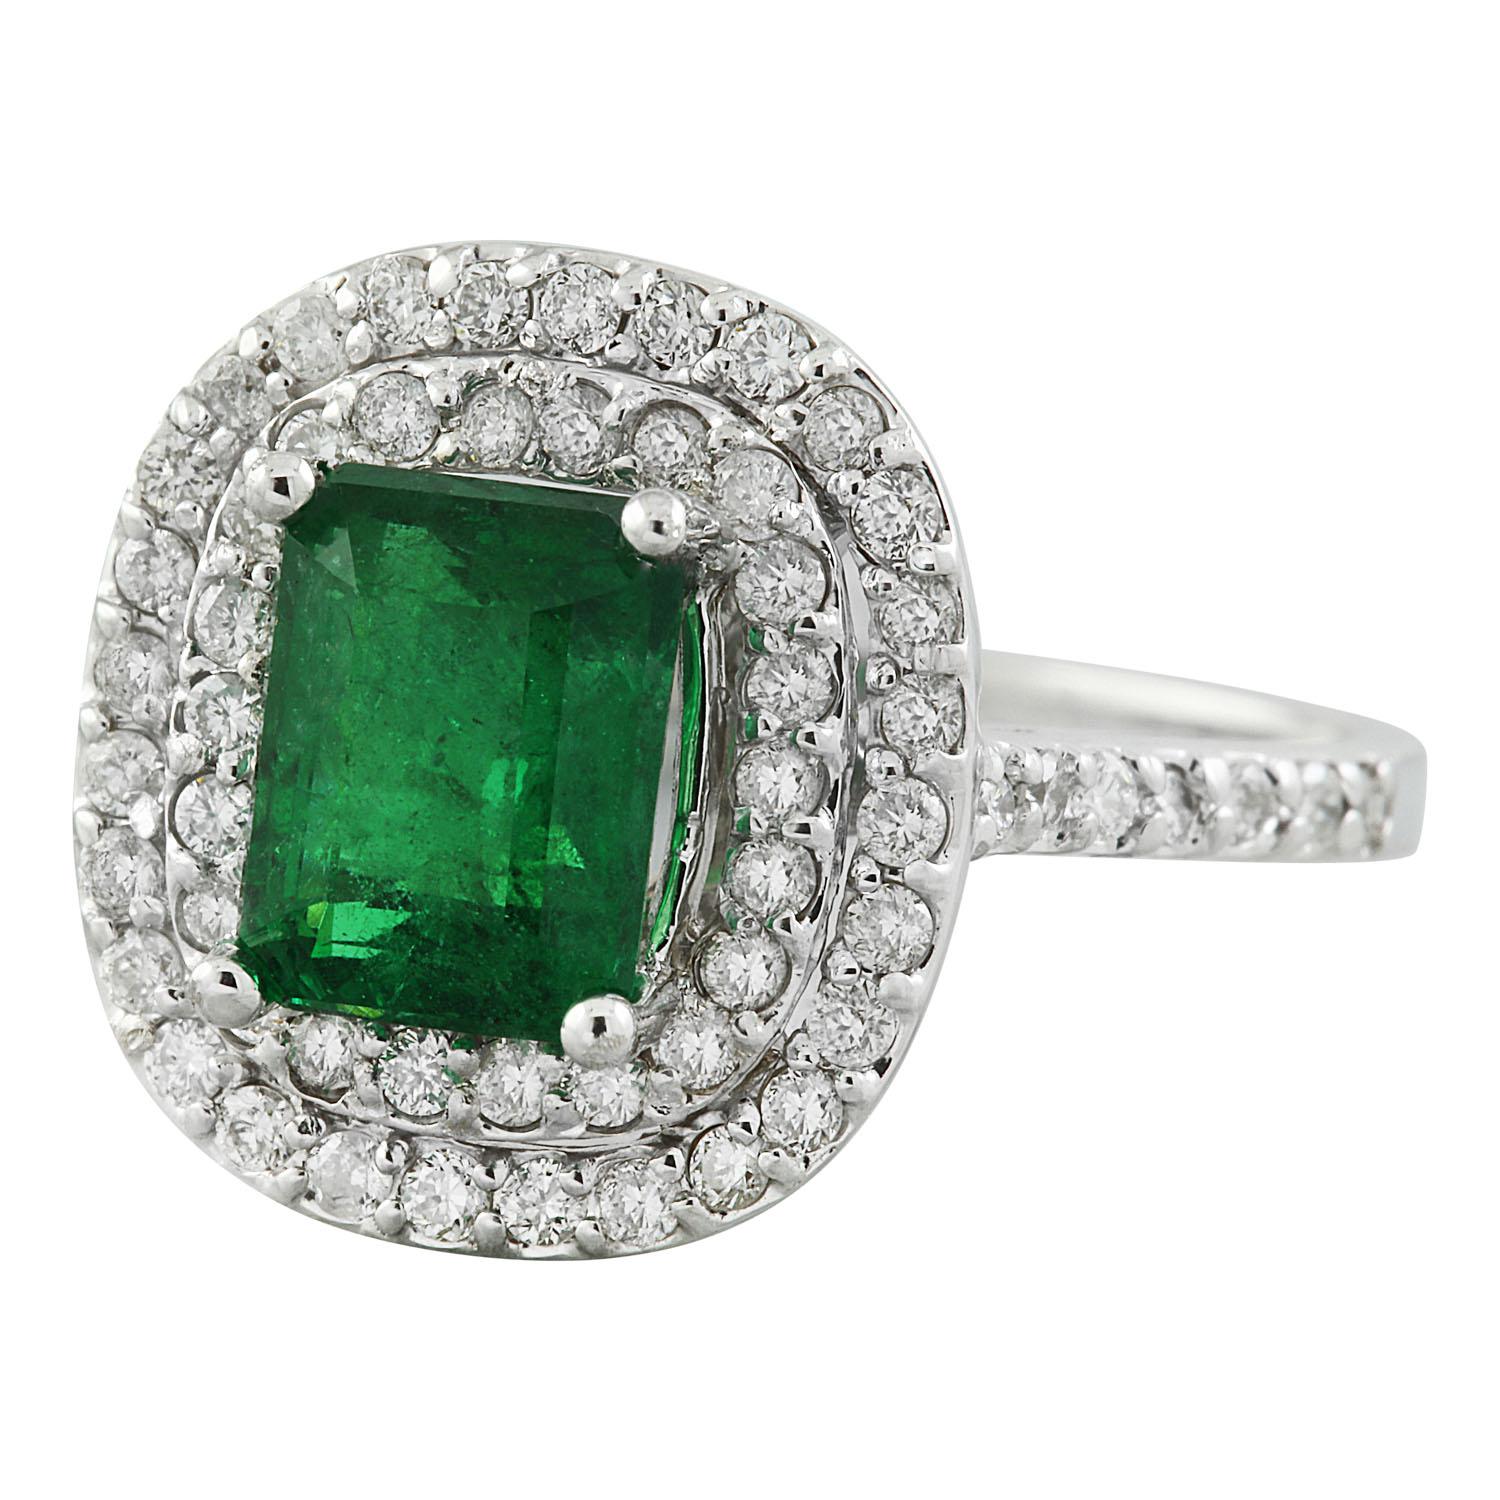 2.60 Carat Natural Emerald 14 Karat Solid White Gold Diamond Ring
Stamped: 14K 
Total Ring Weight: 5.3 Grams 
Emerald Weight 2.00 Carat (8.00x6.00 Millimeters)
Diamond Weight: 0.60 carat (F-G Color, VS2-SI1 Clarity)
Face Measures: 14.95x13.95